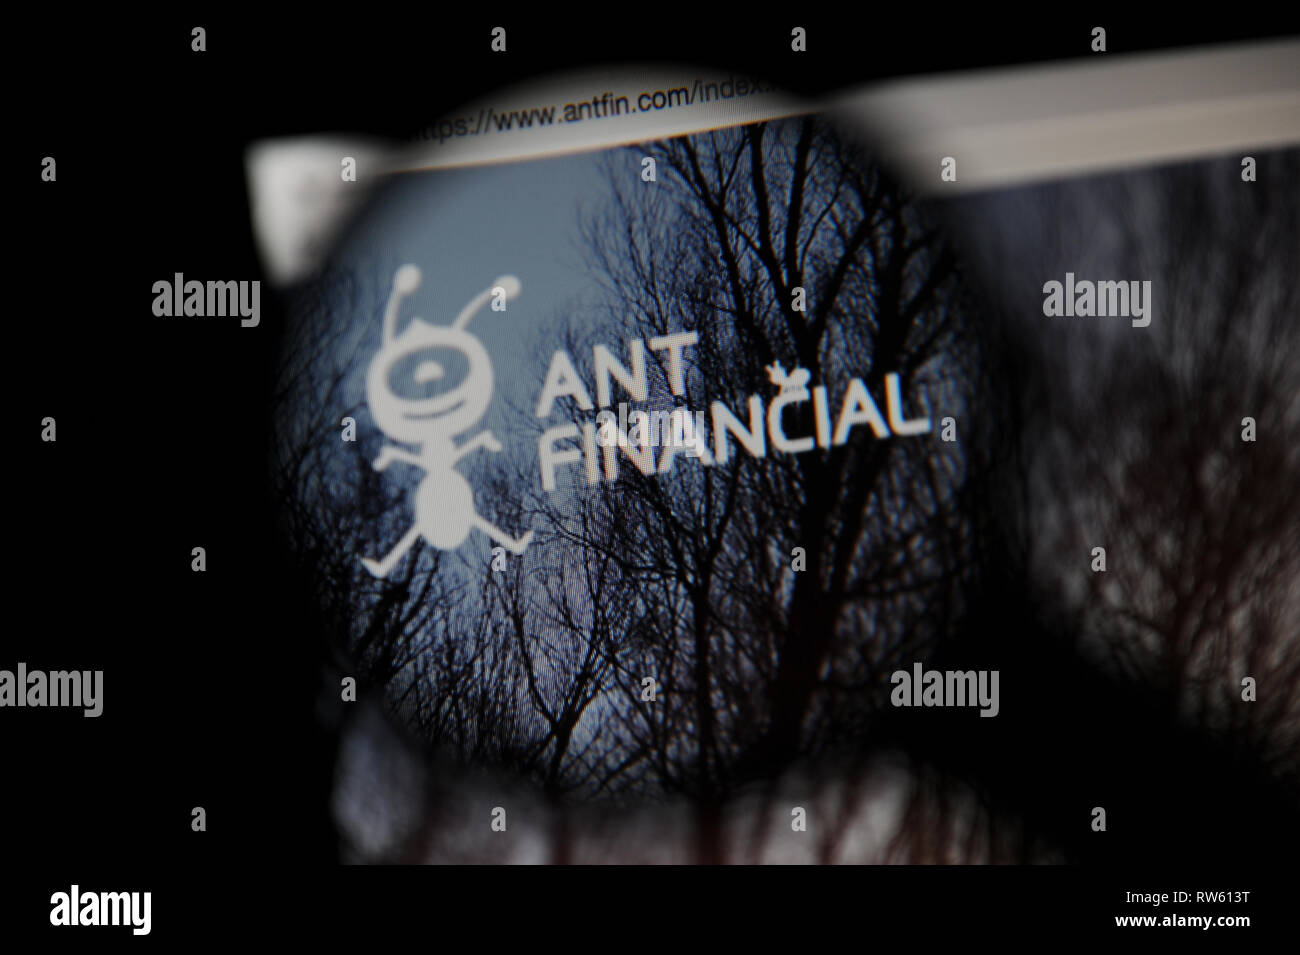 The Ant Financial website seen through a magnifying glass Stock Photo